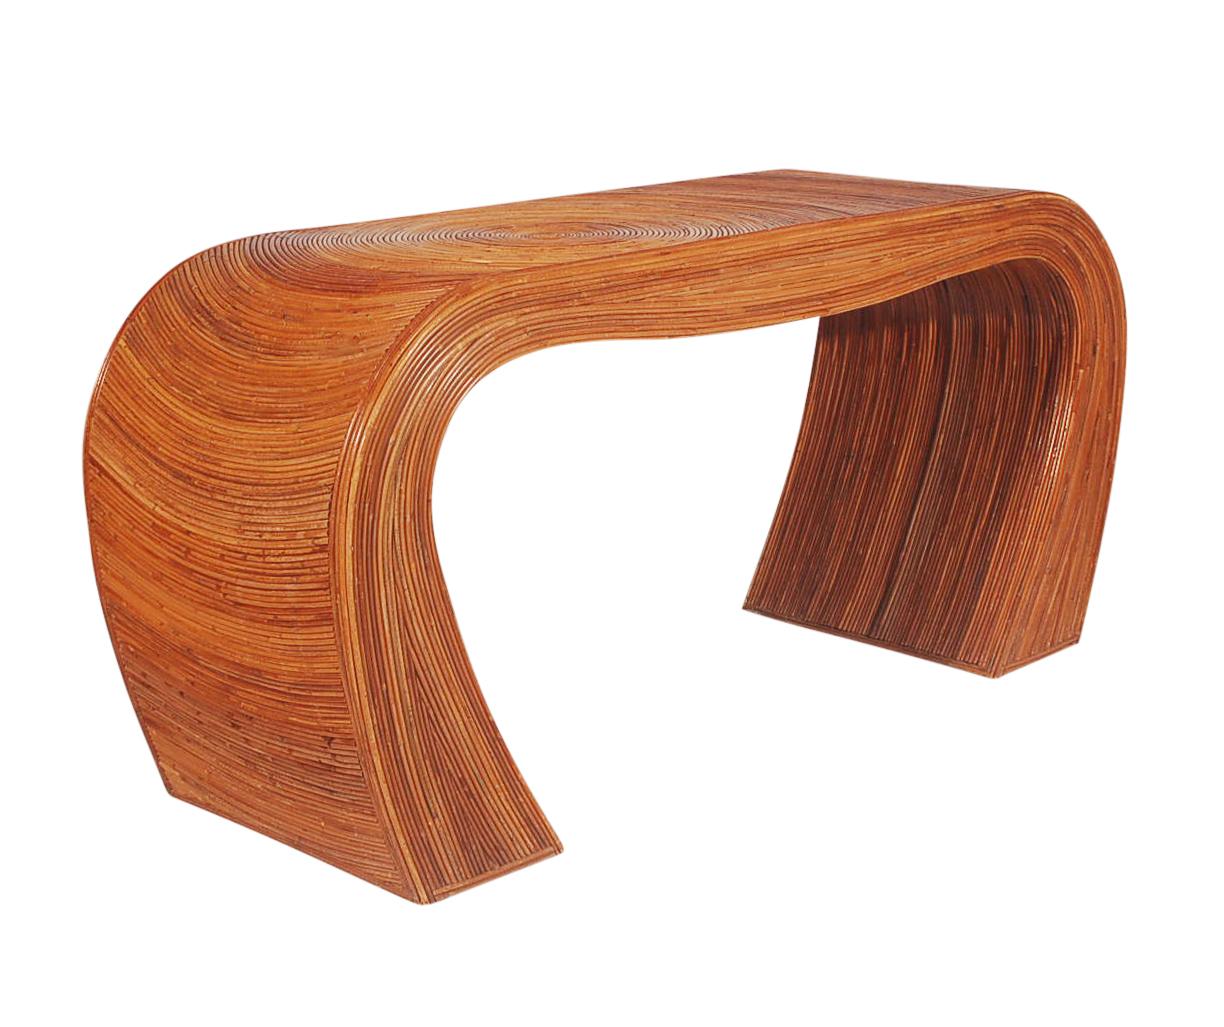 A sculptural pencil reed coffee table. It features wood construction with pencil reed bamboo design work.